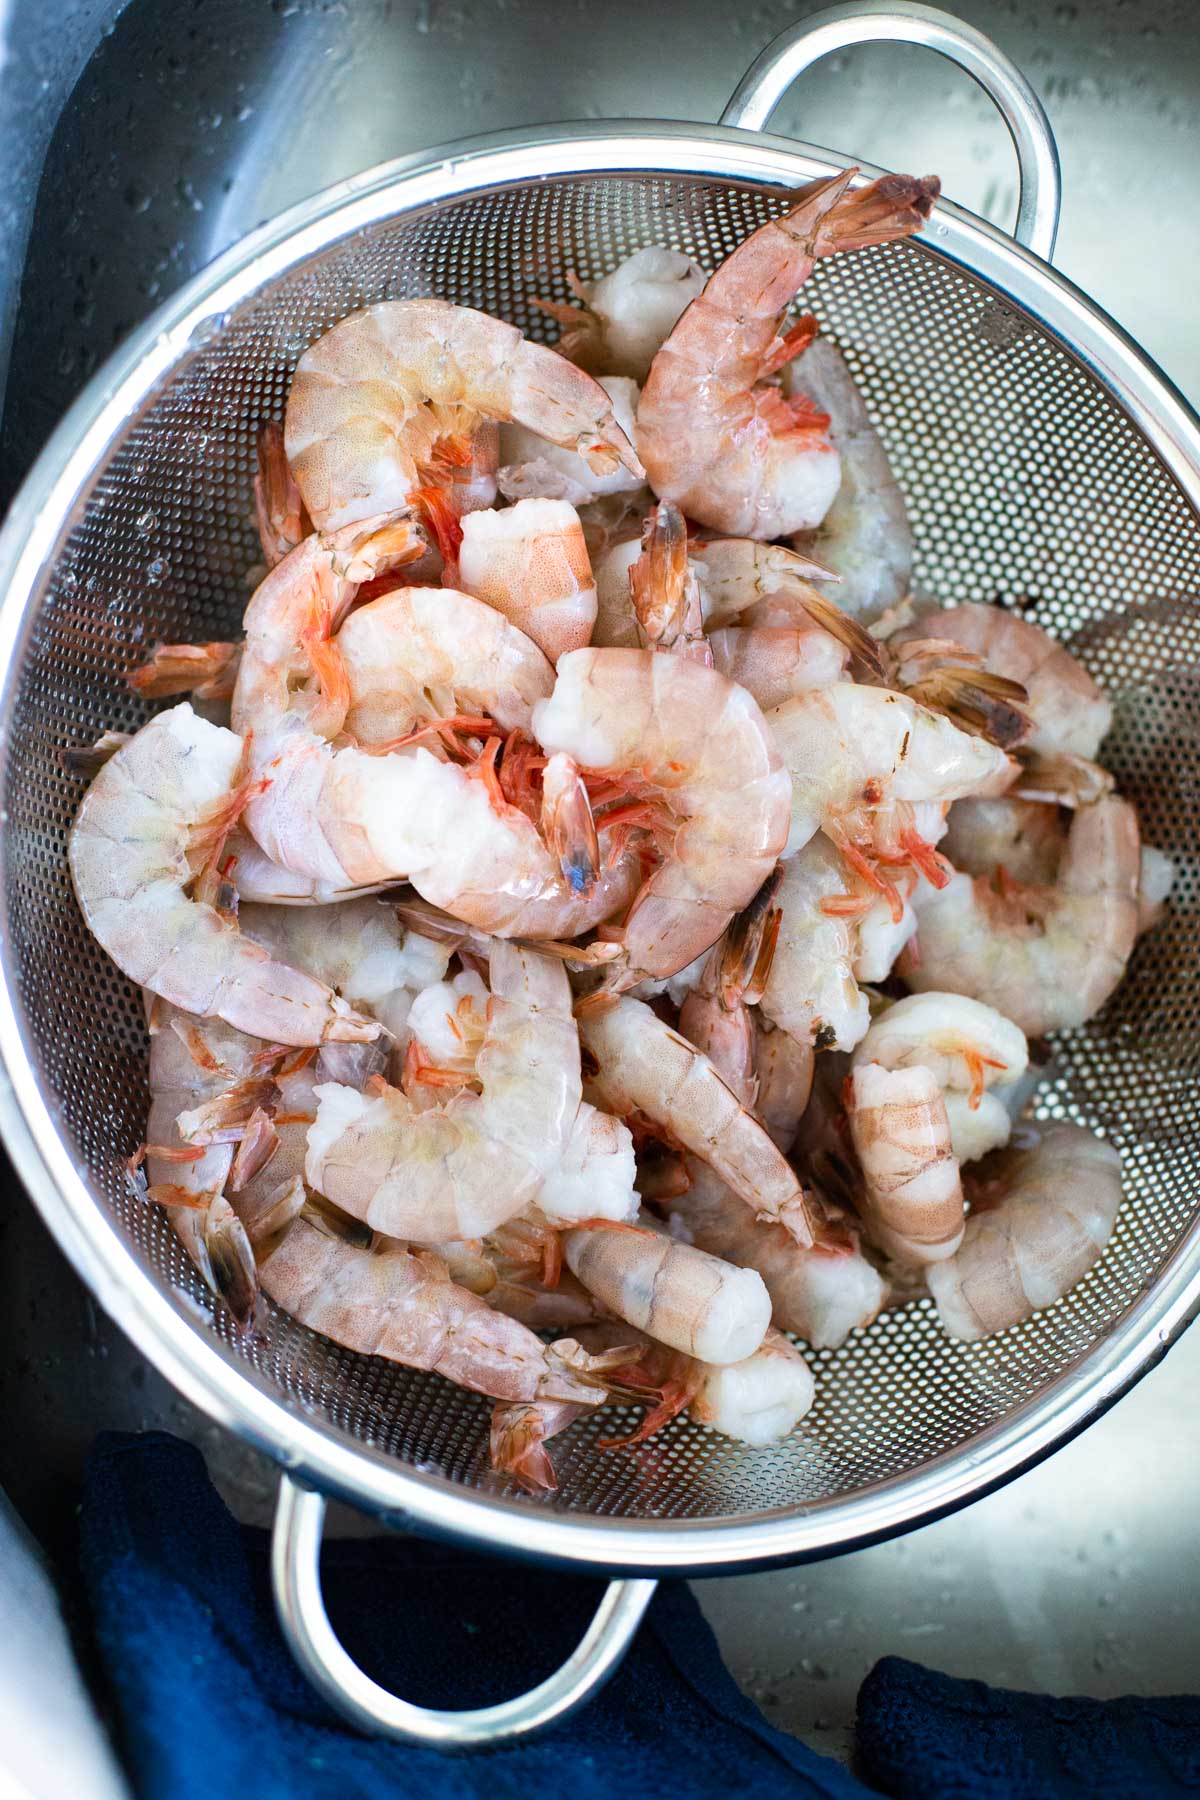 The shrimp are being drained in a large collander.